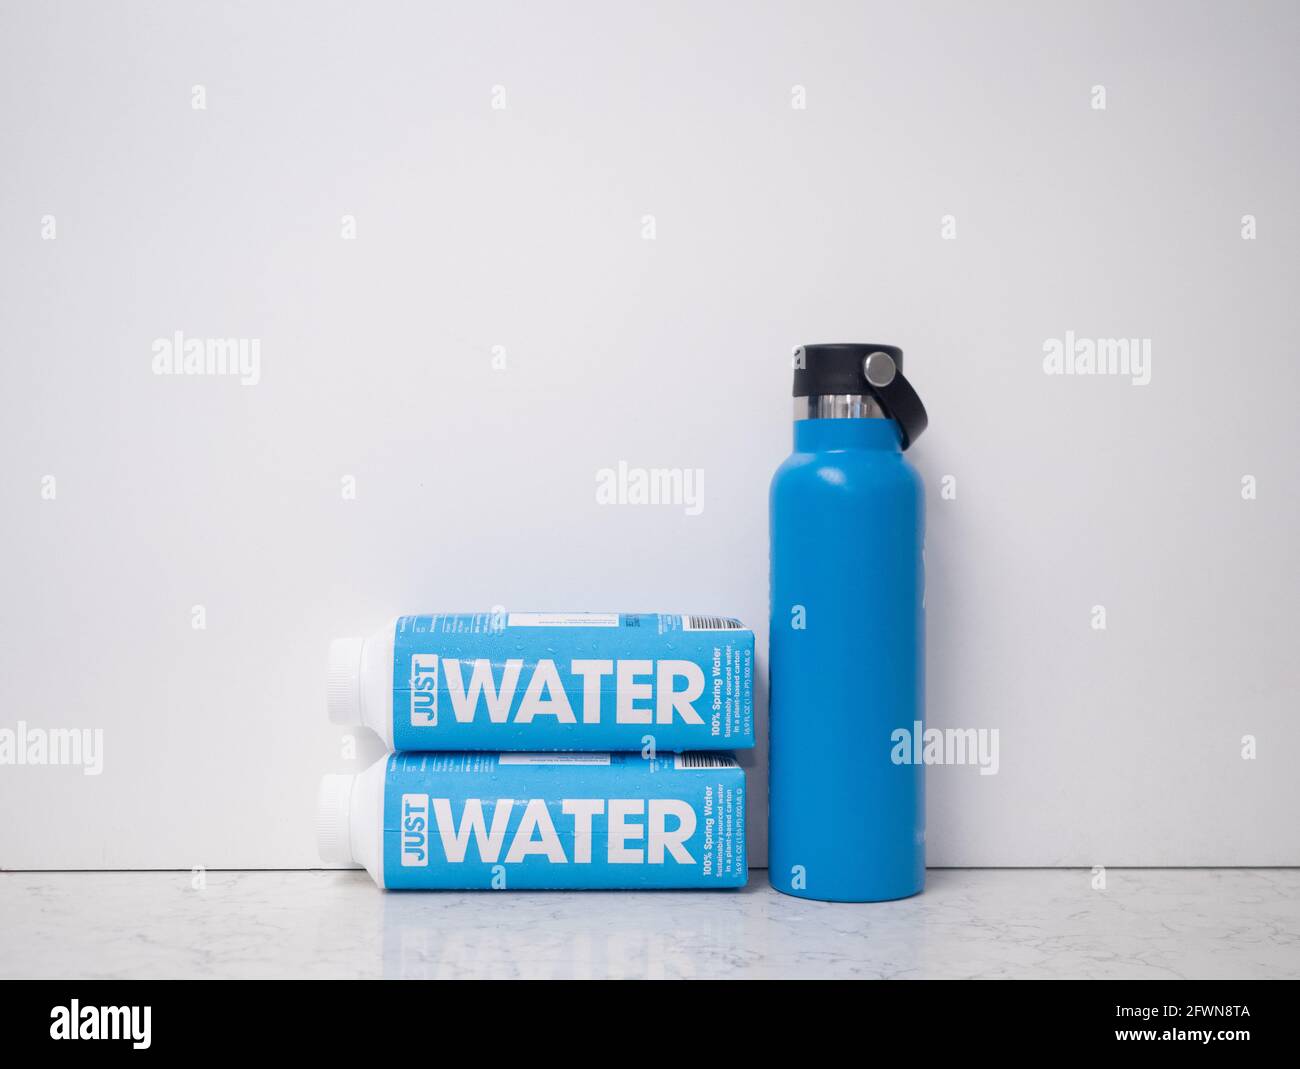 Two cardboard containers with water and a blue metal reusable container against a white background on a marble countertop. Stock Photo